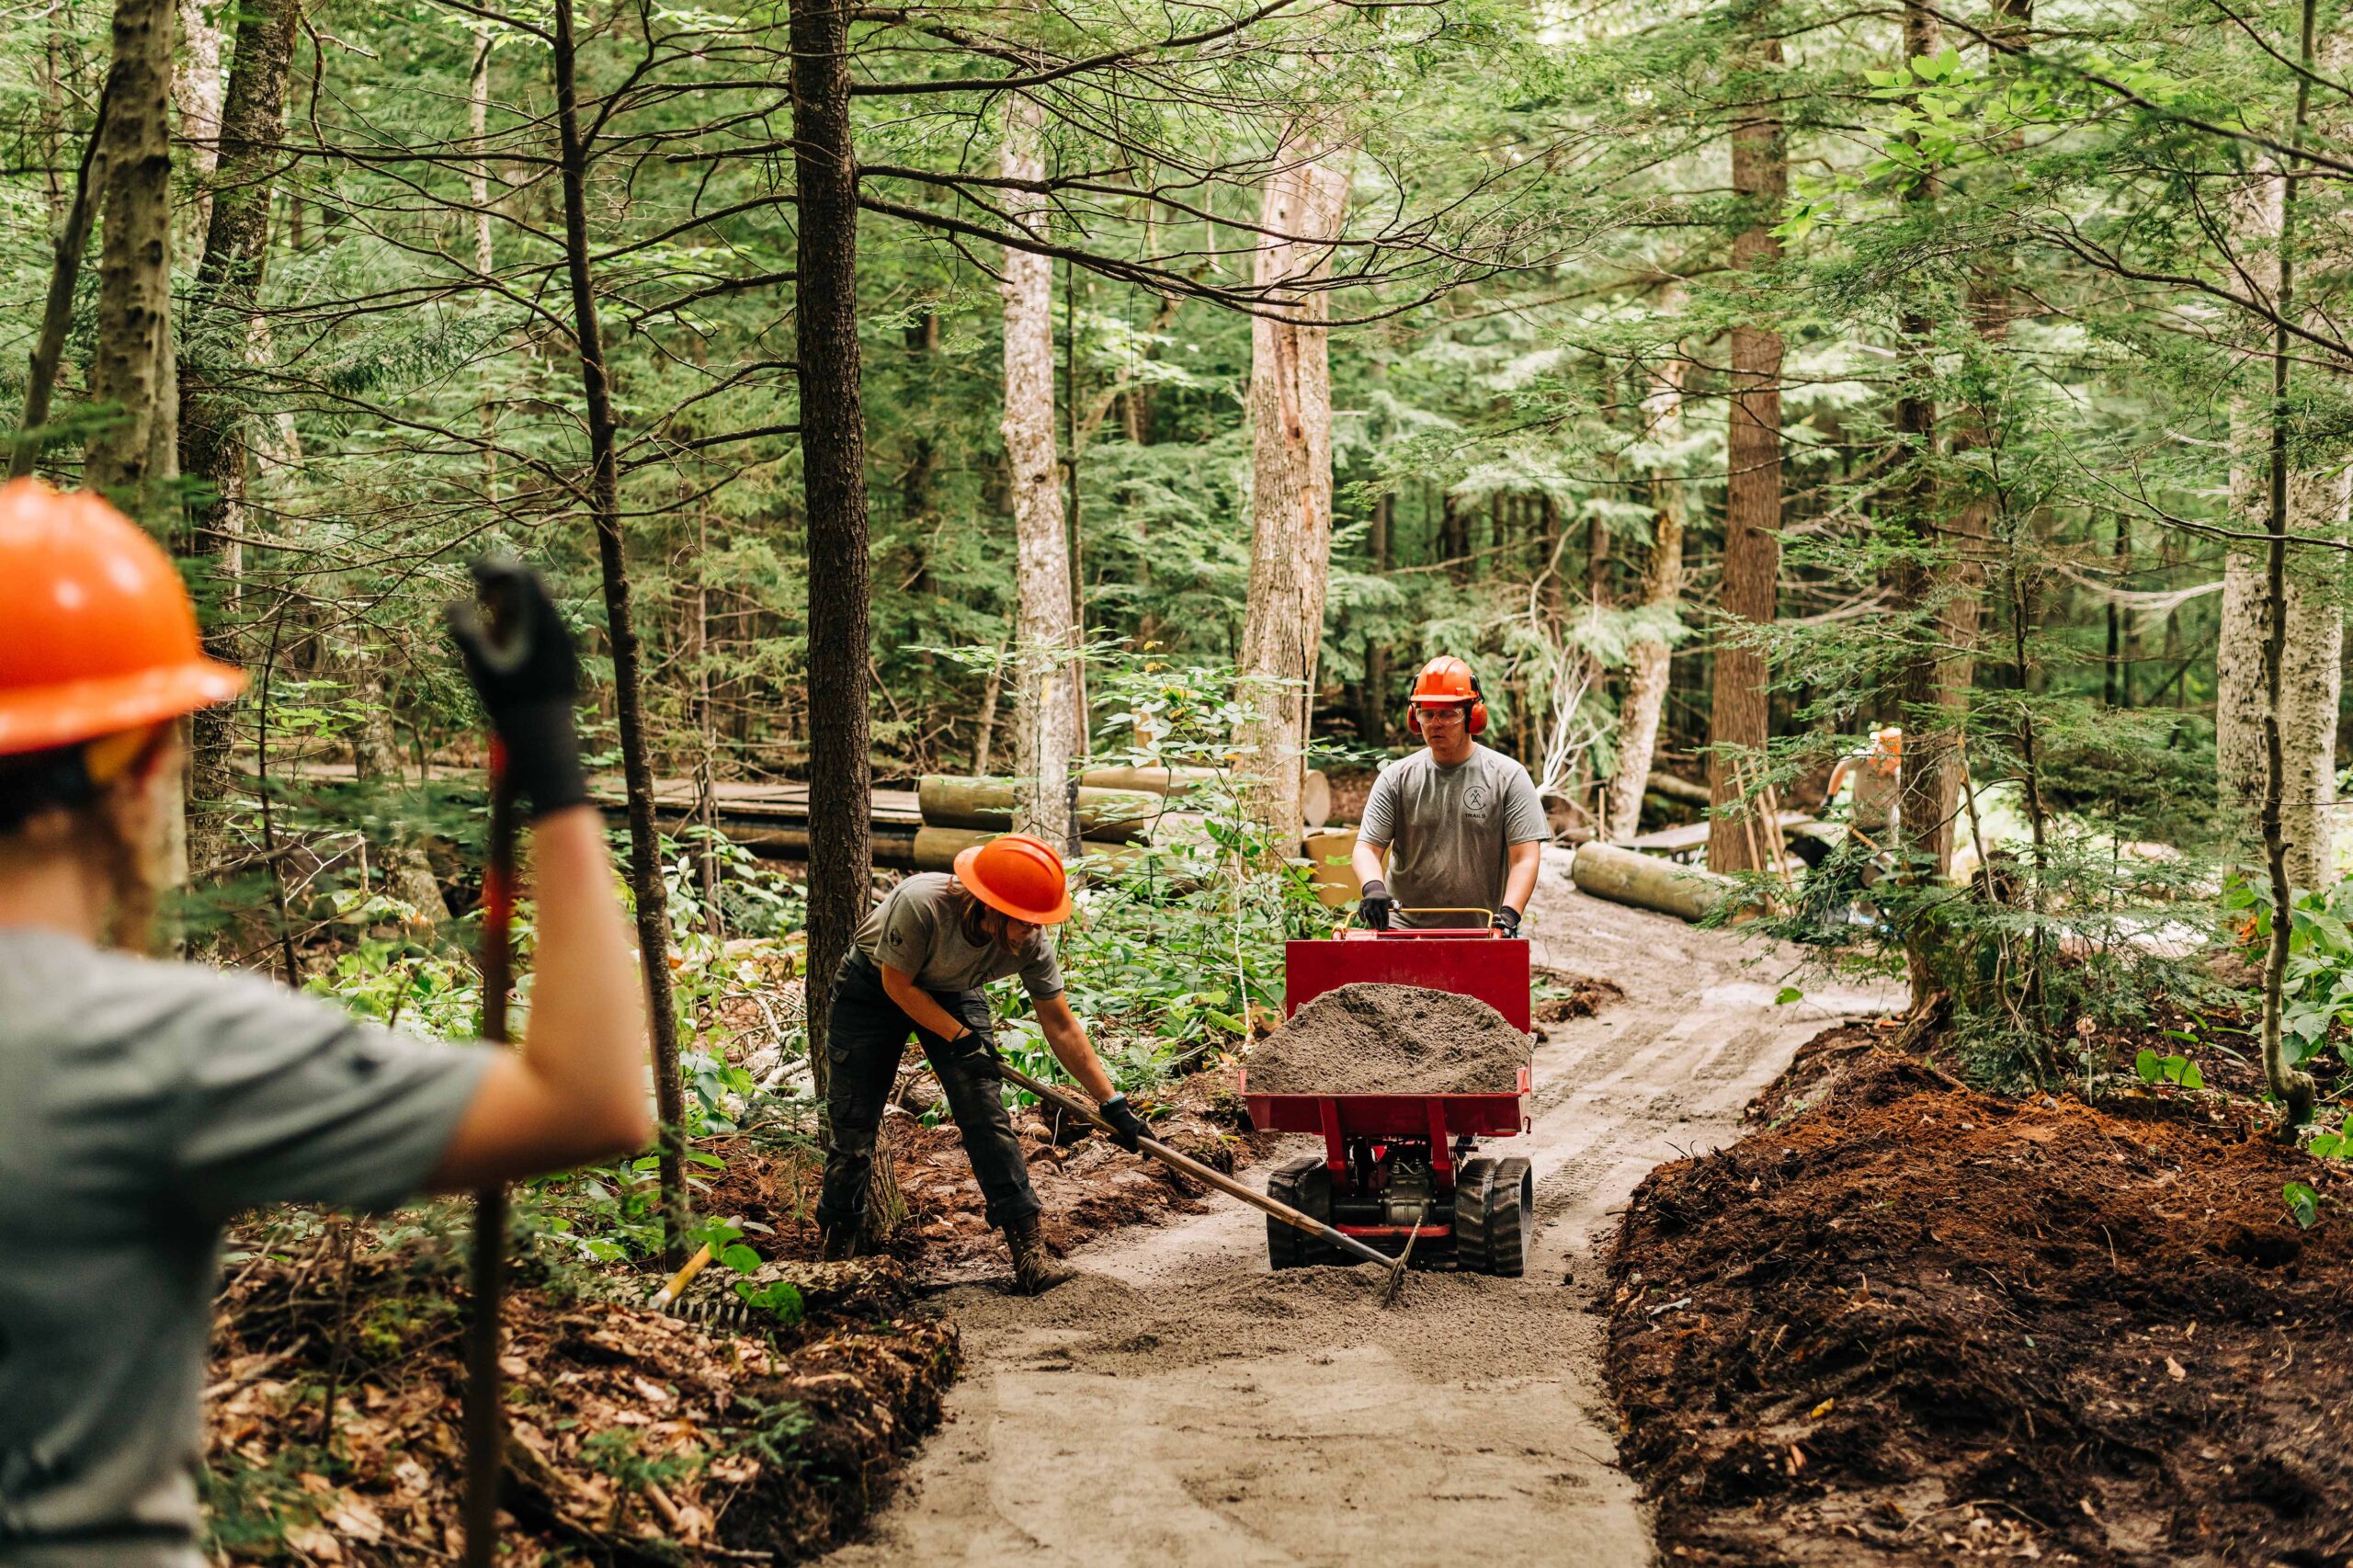 Trail crew in the forest